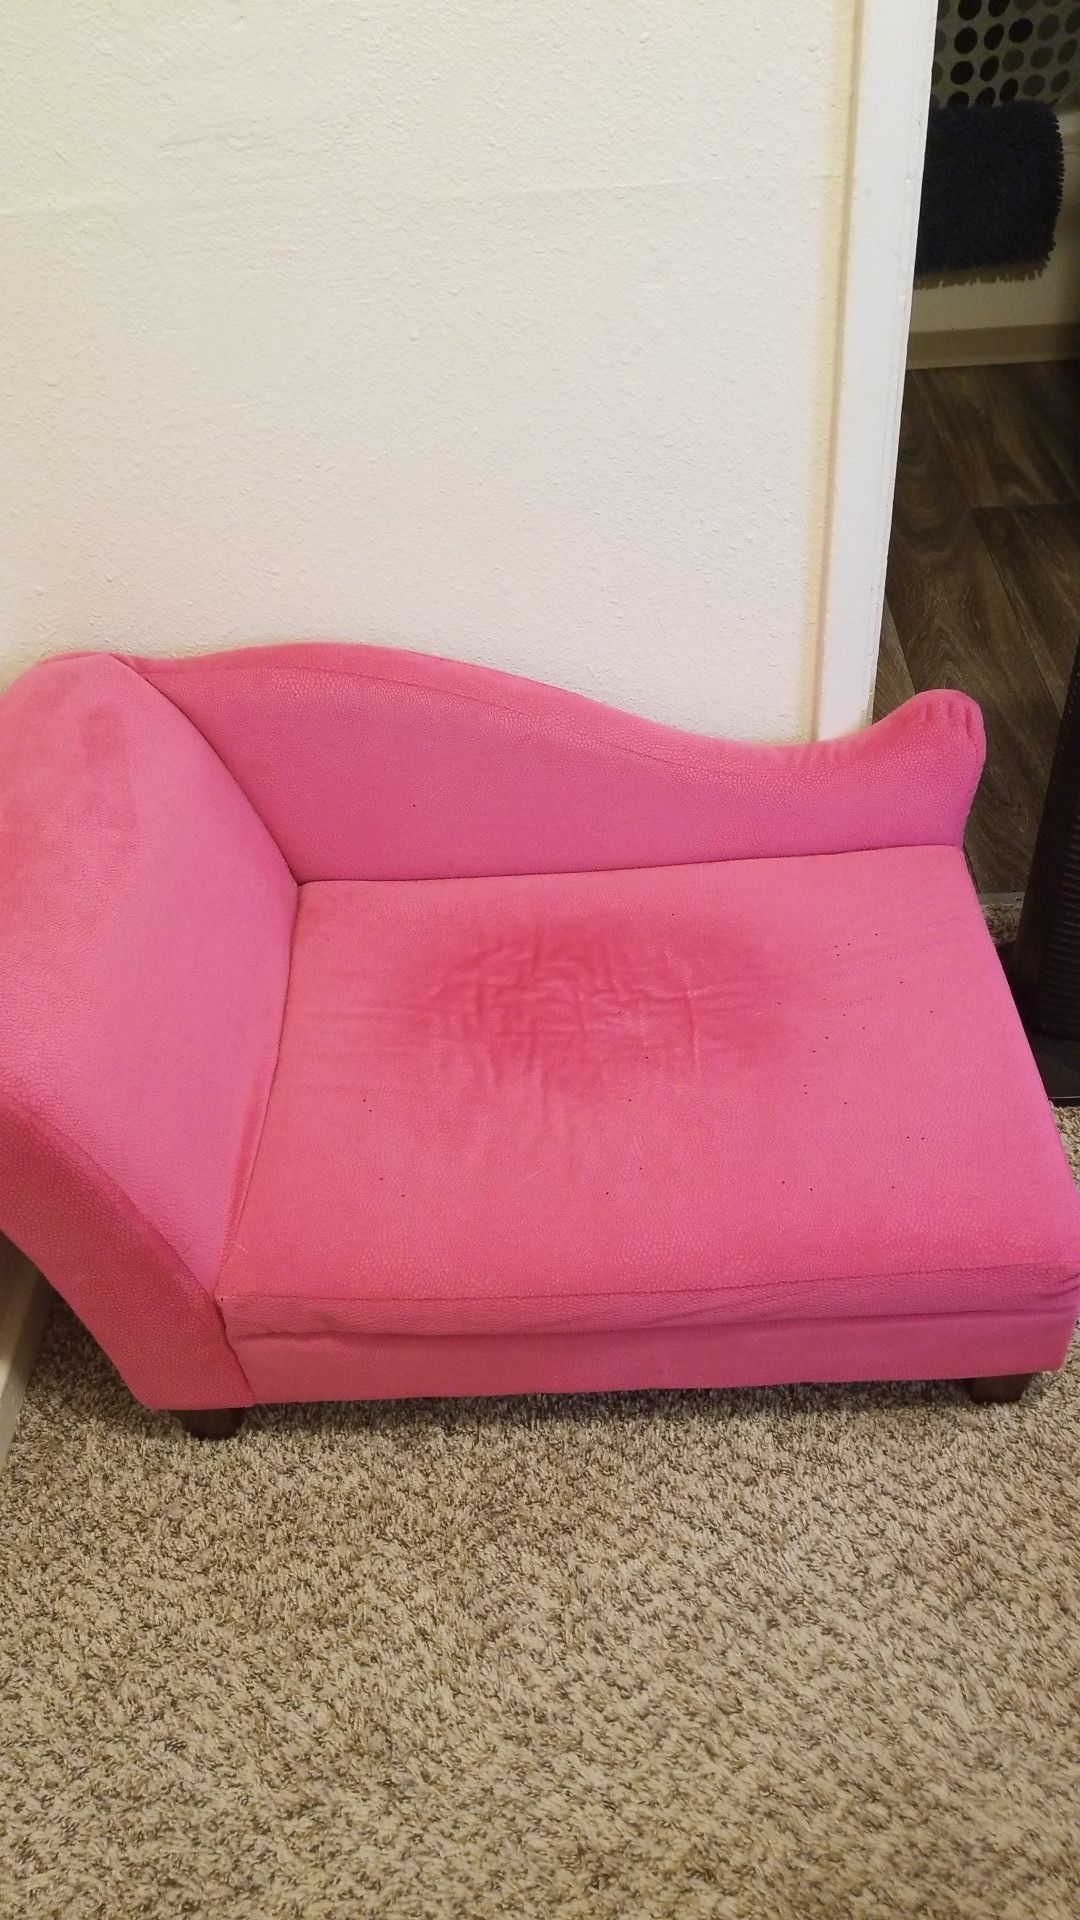 Pink dog couch